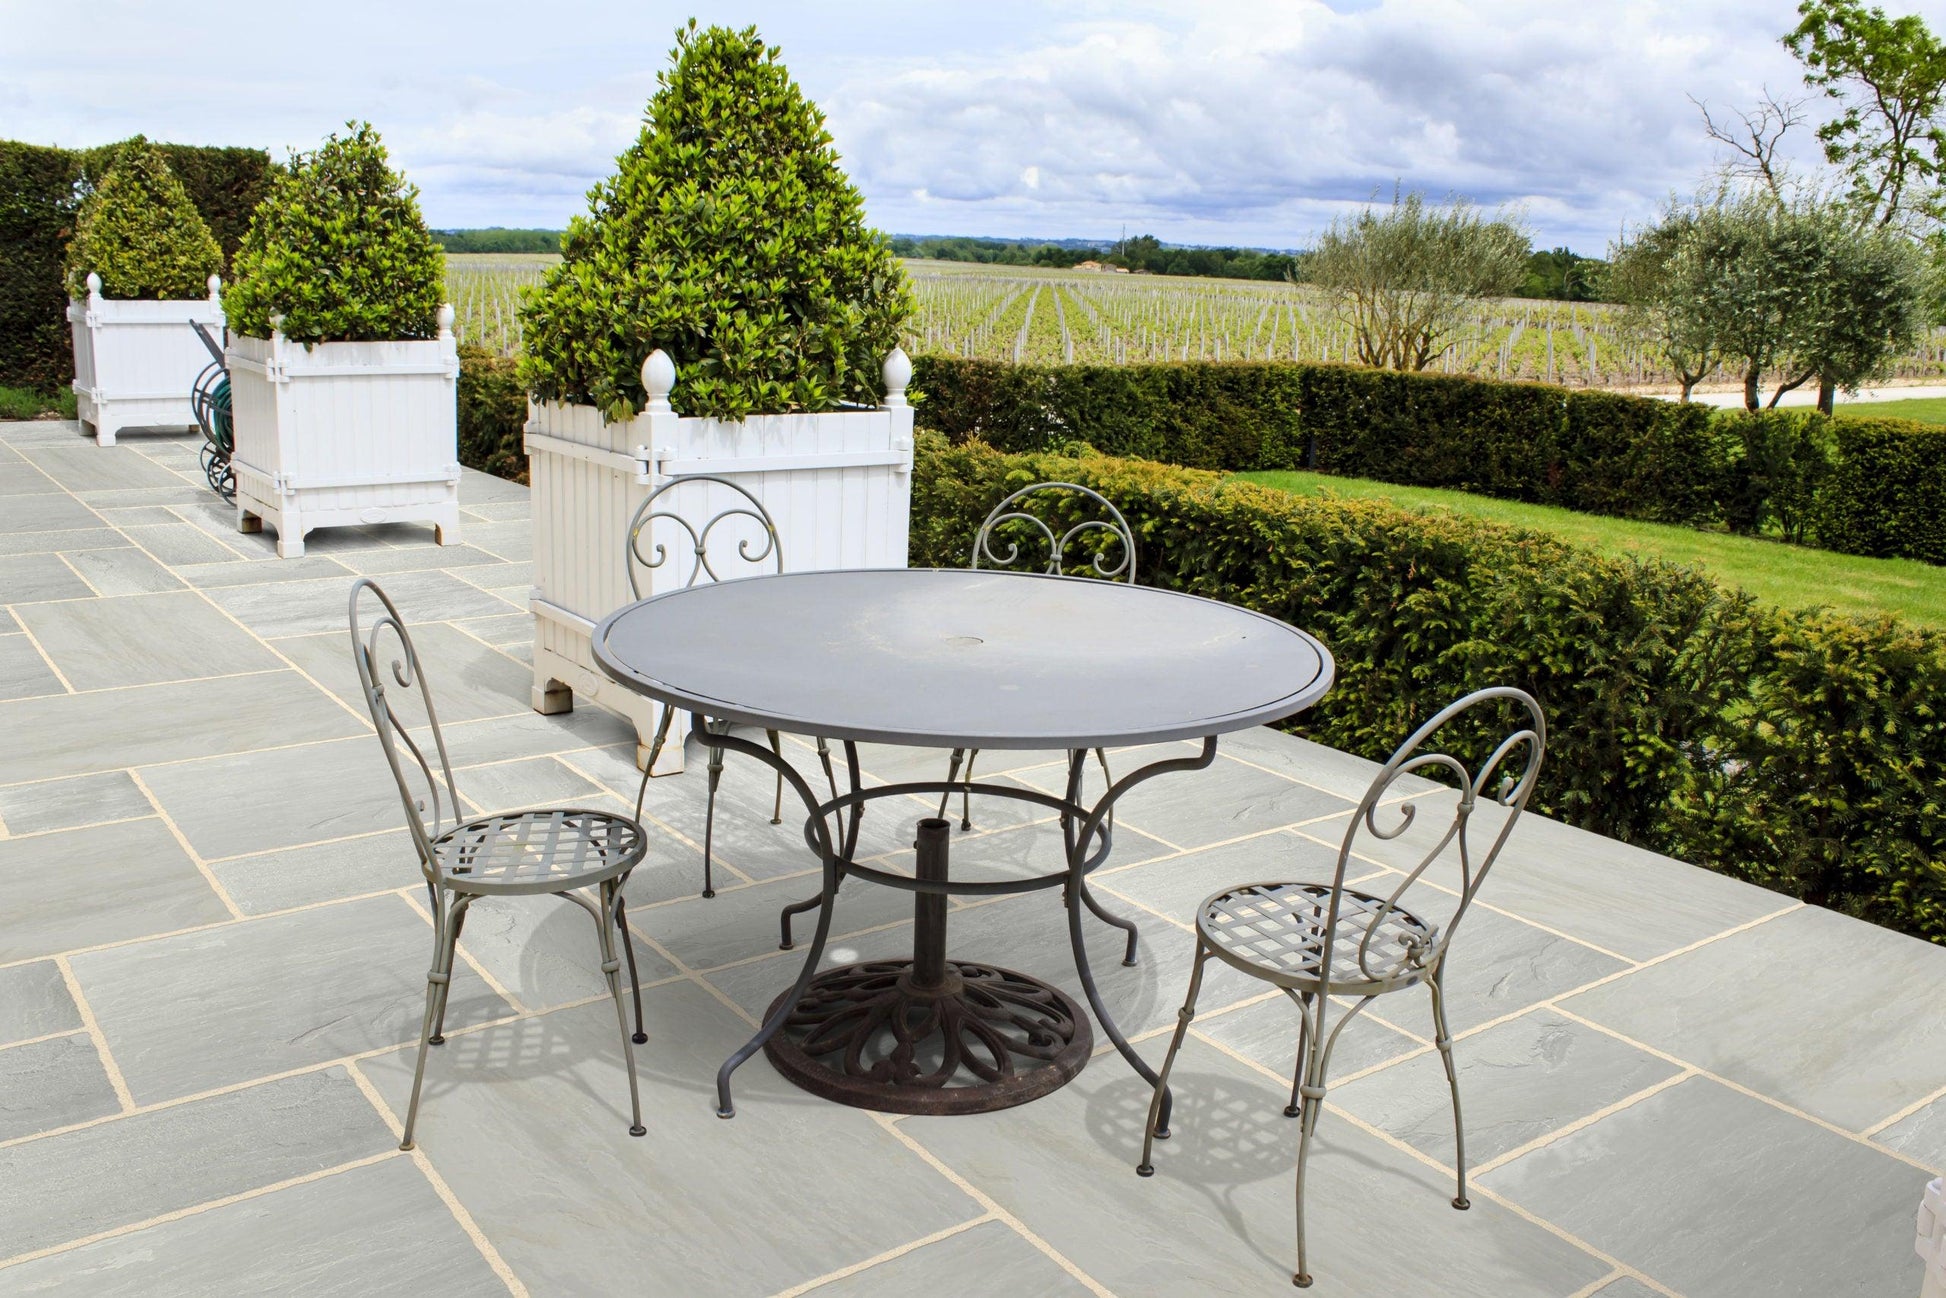 An outdoor patio with a round metal table and three matching chairs sits on a floor paved with Brisks Kandla Grey Sandstone Paving Slabs. In the background, manicured hedges, large white planters with green shrubbery, and a scenic view of fields and trees under a cloudy sky complete the serene setting.